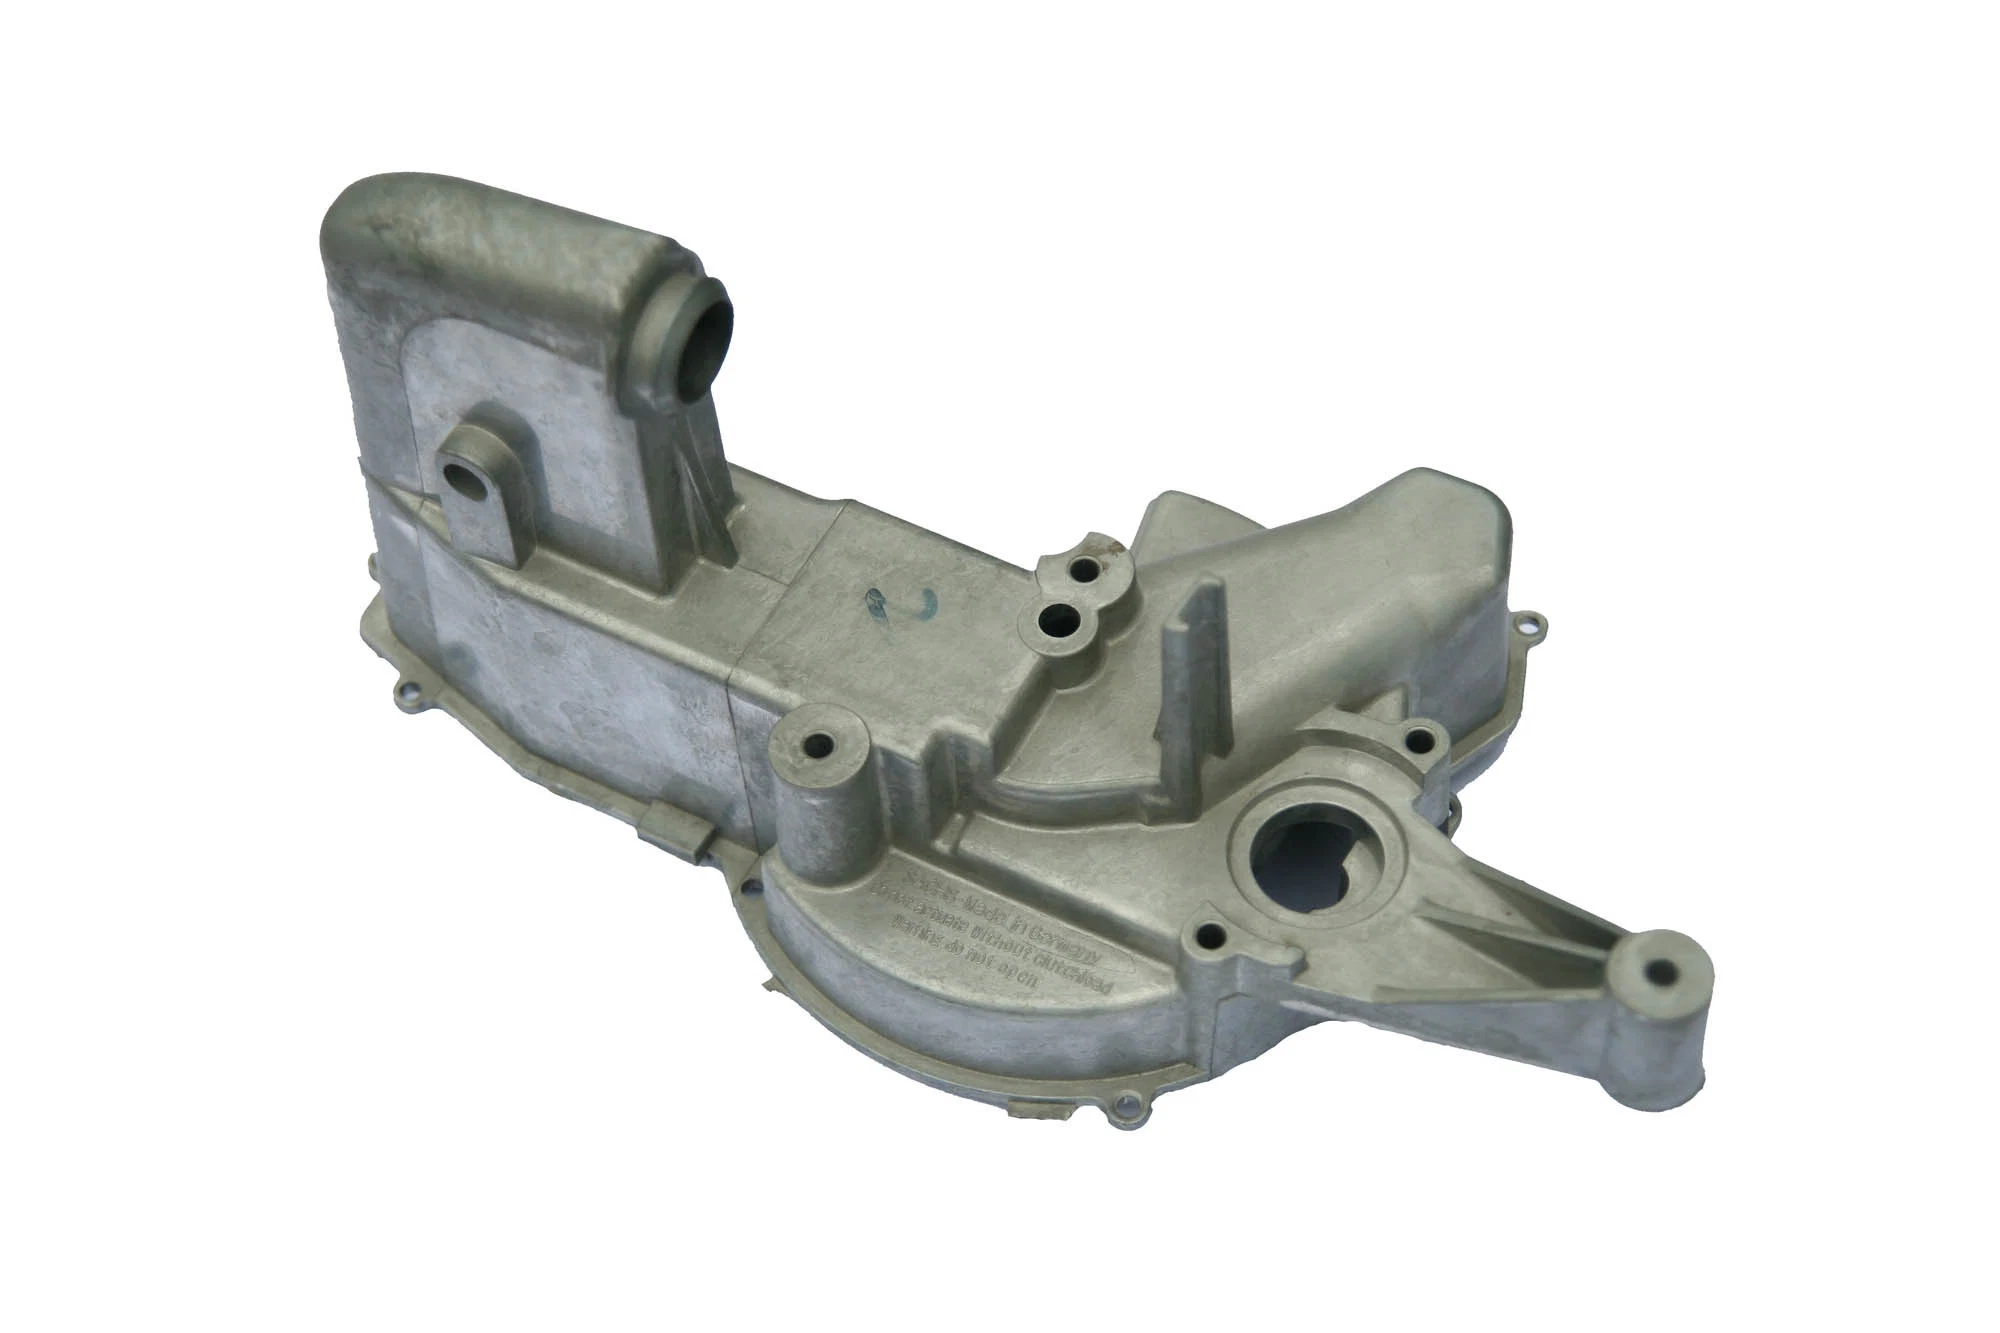 Zhejiang Factory's High-Quality Low-Pressure Customized High-Pressure Die-Casting Aluminum Gravity Die-Casting